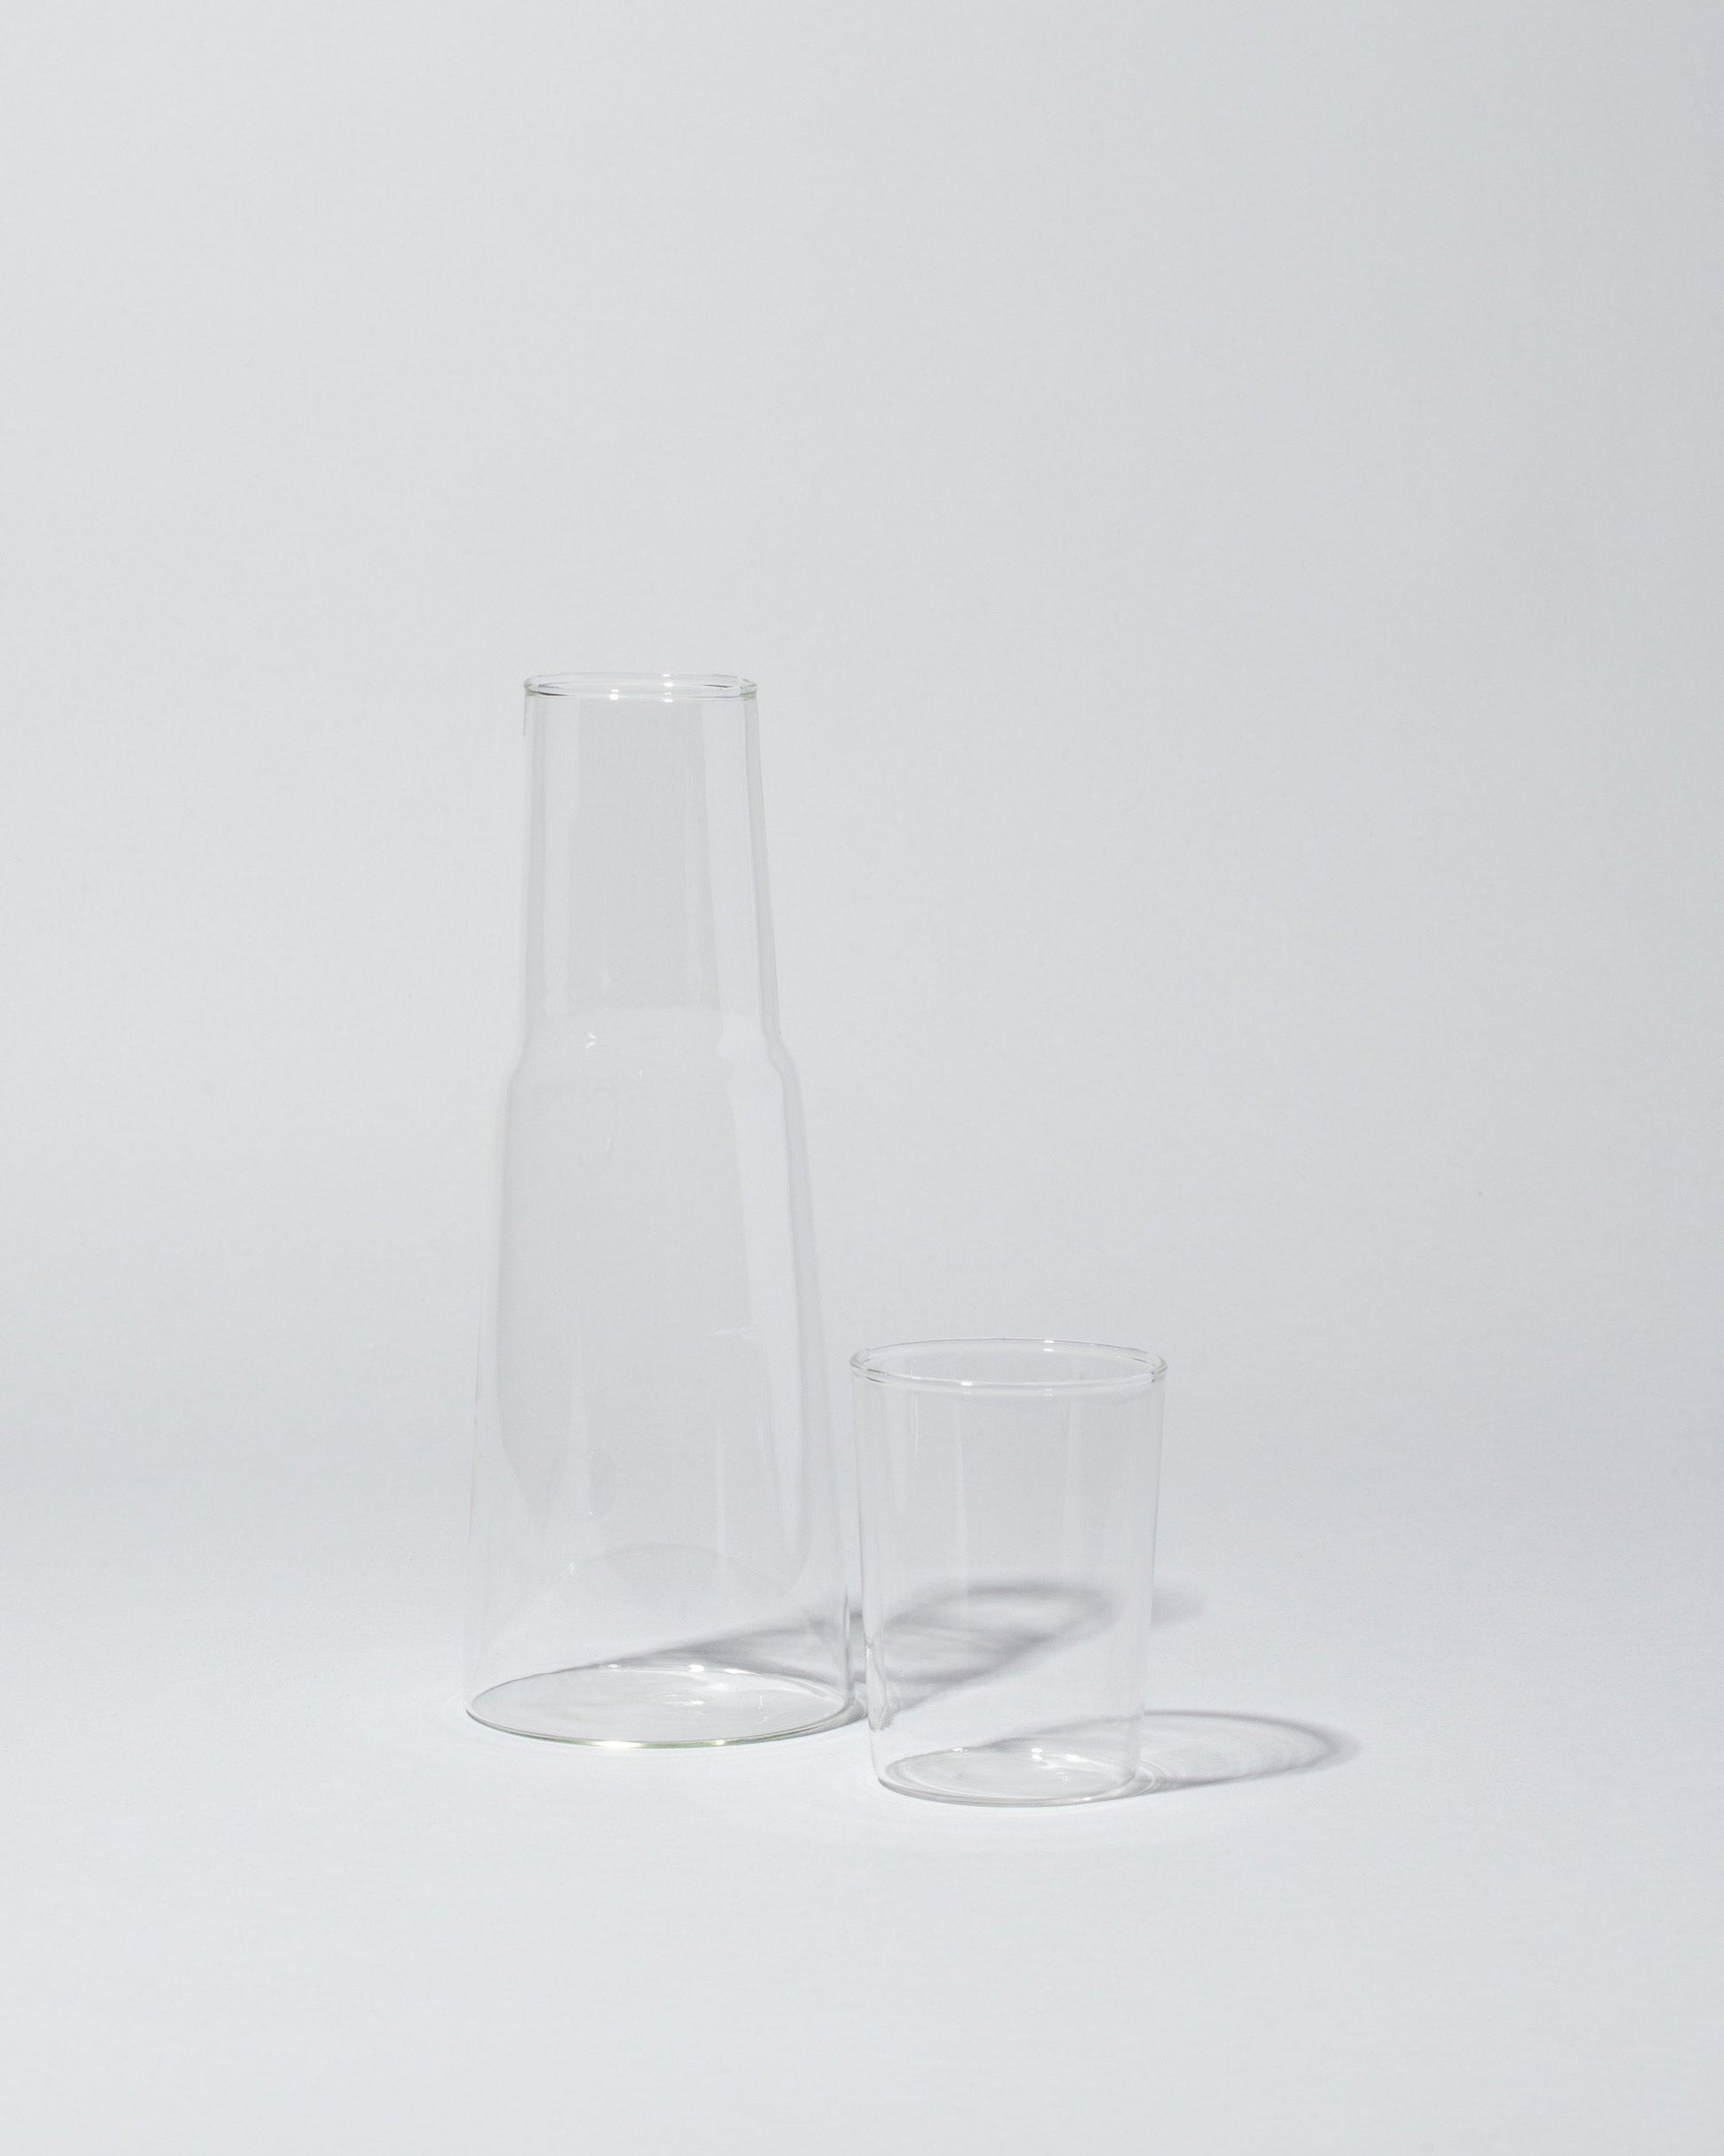 Detail view of the Ichendorf Milano Torre Night Bottle & Glass on light color background.